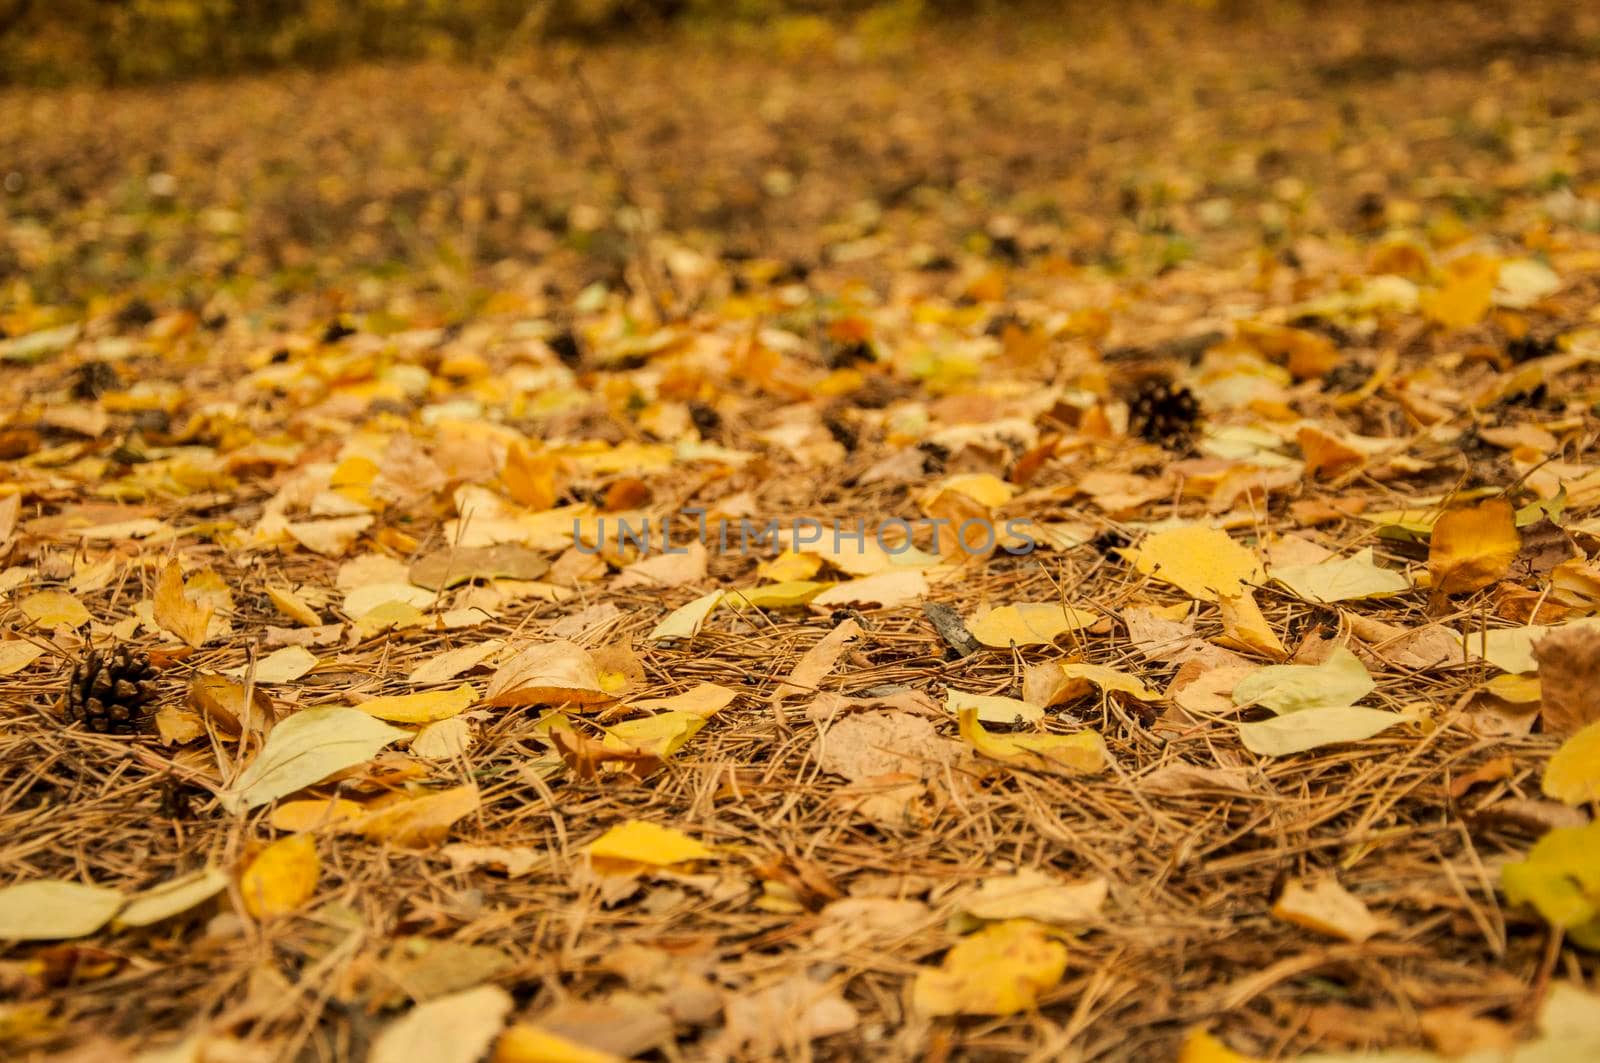 Yellow autumn leaves on ground in beautiful fall park. Fallen golden autumn leaves close up view on ground in sunny morning light yard. November nature macro leaf background